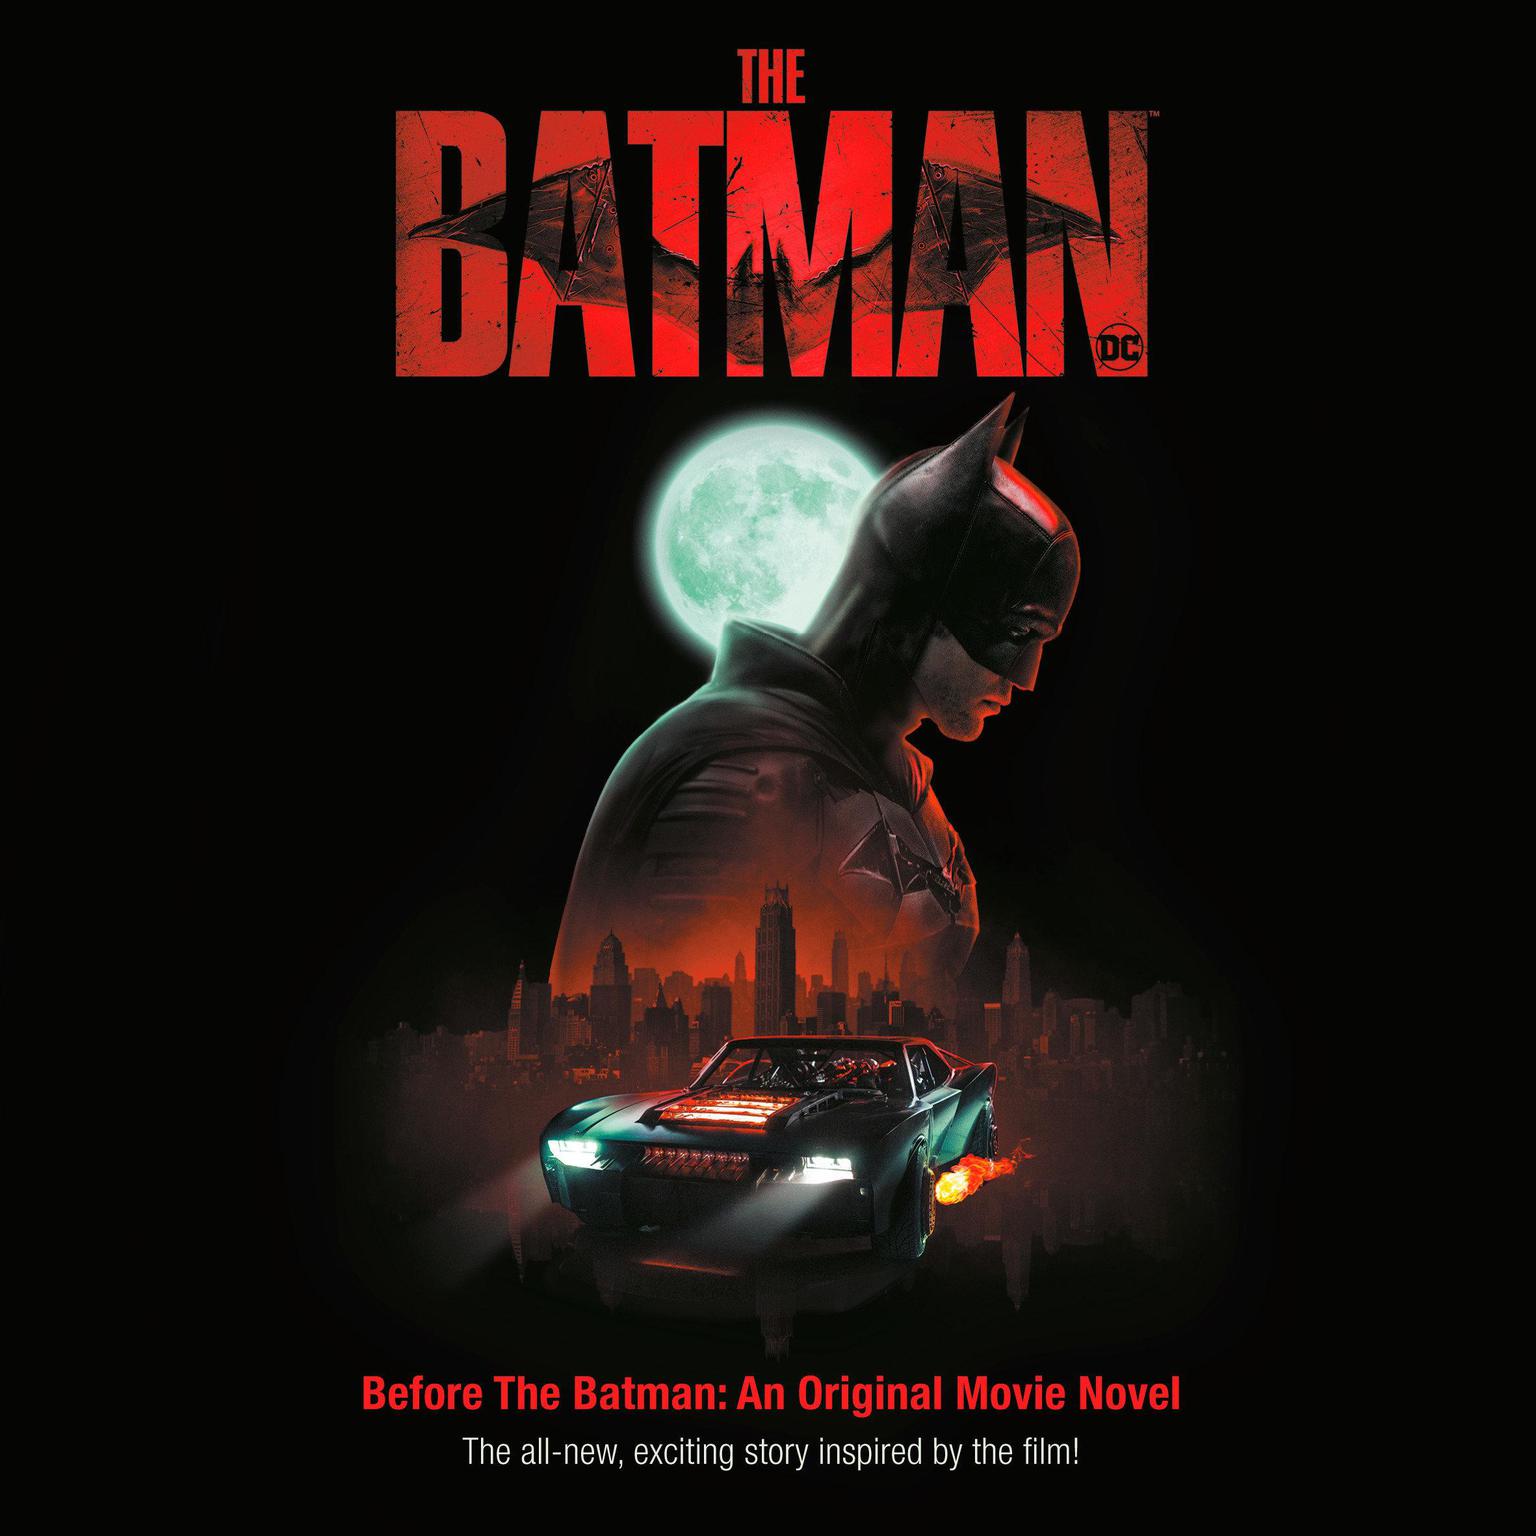 Before the Batman: An Original Movie Novel (The Batman Movie): The all-new, exciting story inspired by the film! Audiobook, by David Lewman